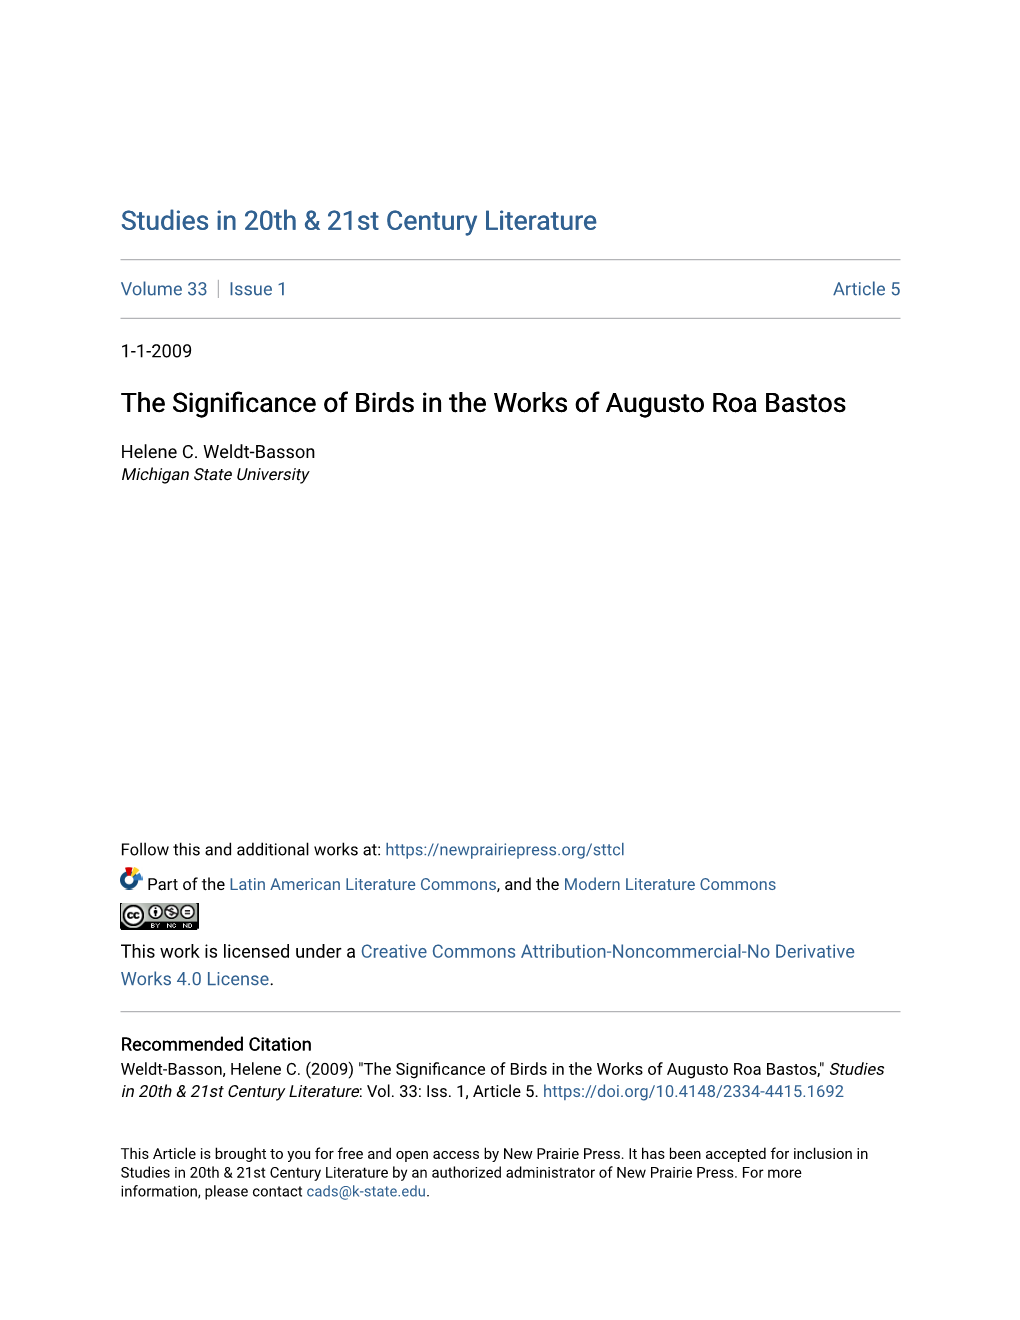 The Significance of Birds in the Works of Augusto Roa Bastos